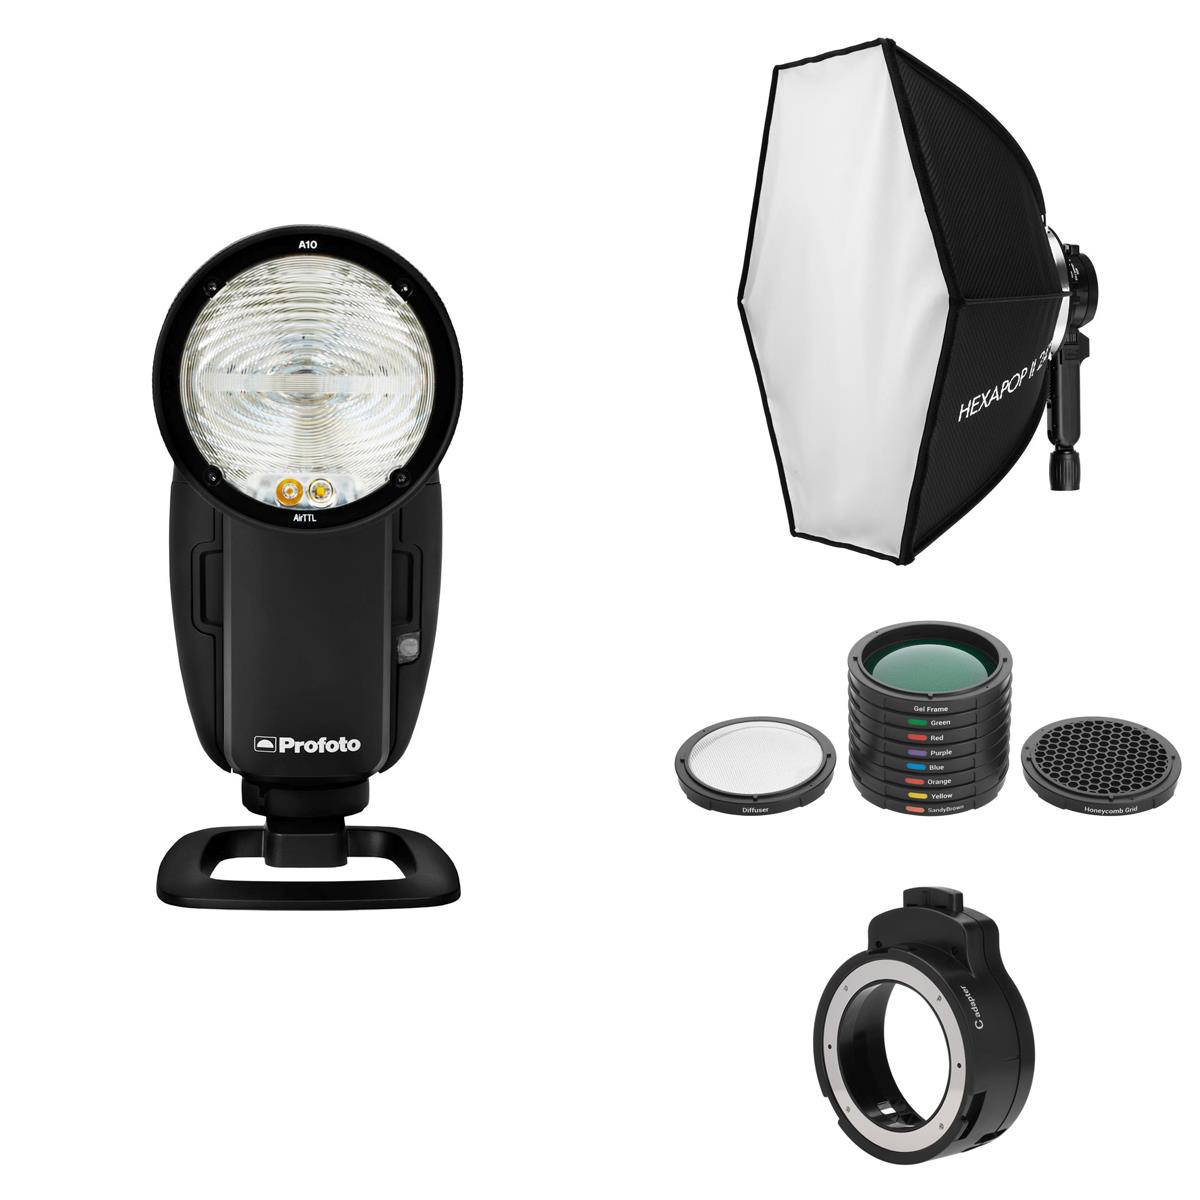 Image of Profoto A10 On and Off Camera Flash for Canon Camera with Accessories Bundle